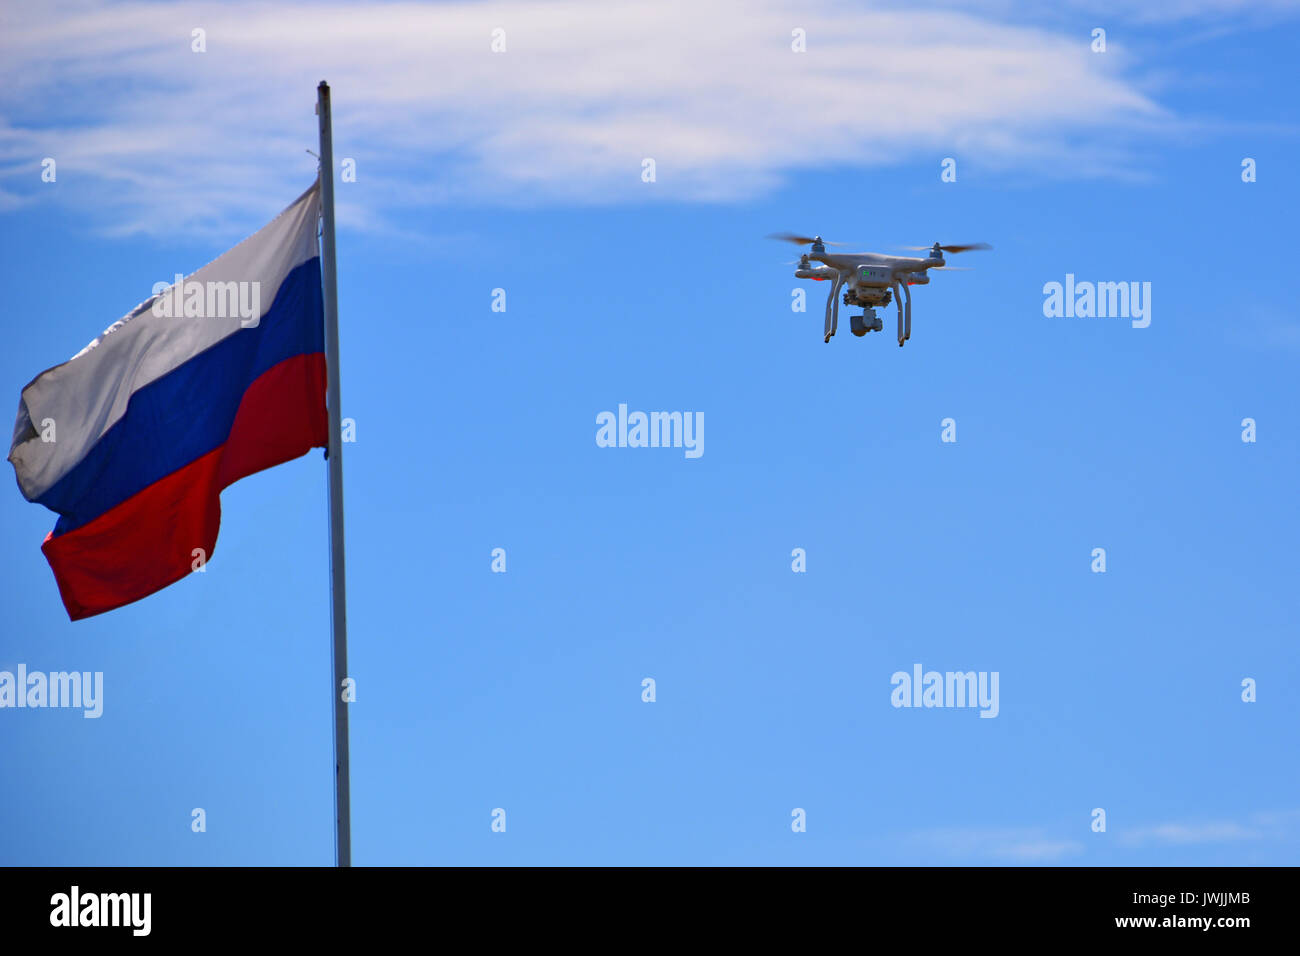 Flying drone with camera. Drone with digital camera flying over a Russia flag Stock Photo